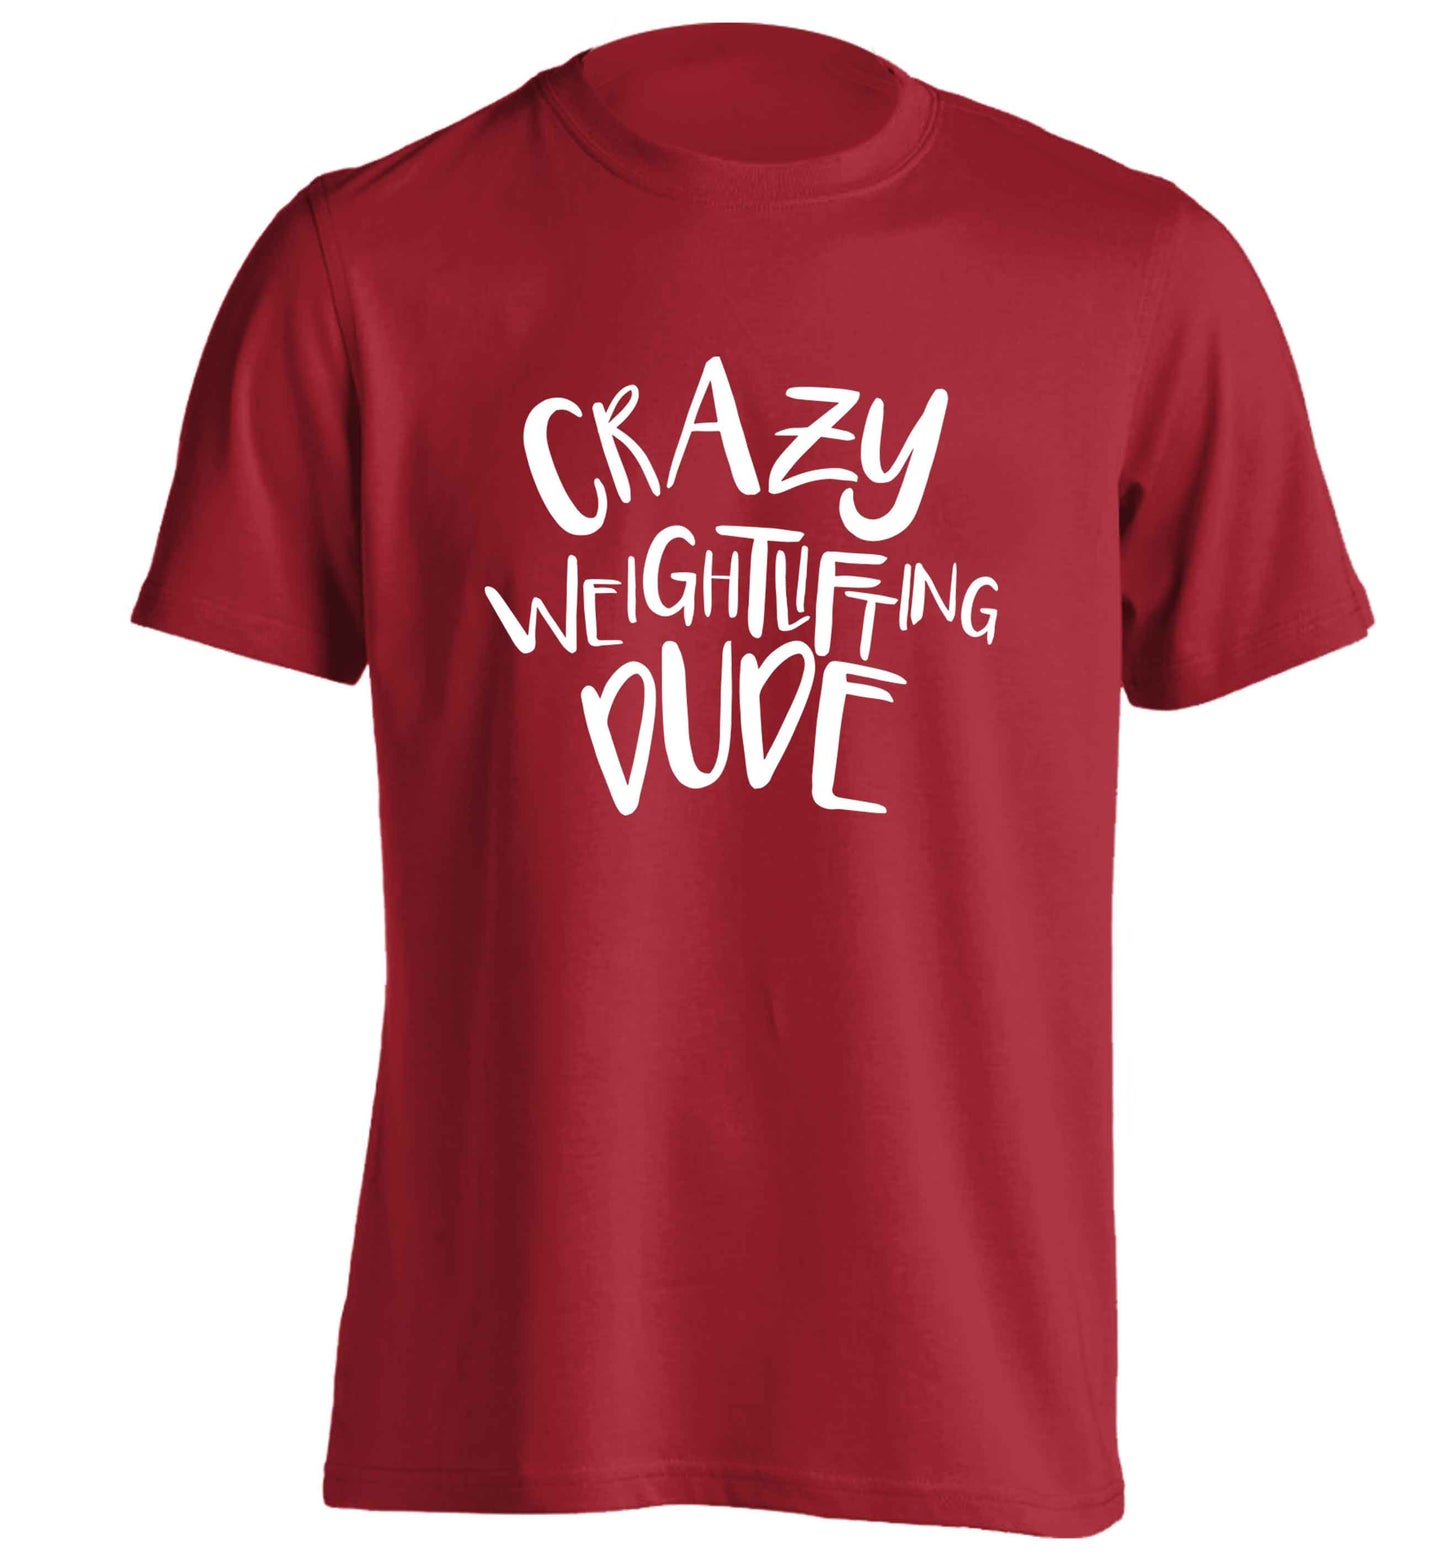 Crazy weightlifting dude adults unisex red Tshirt 2XL